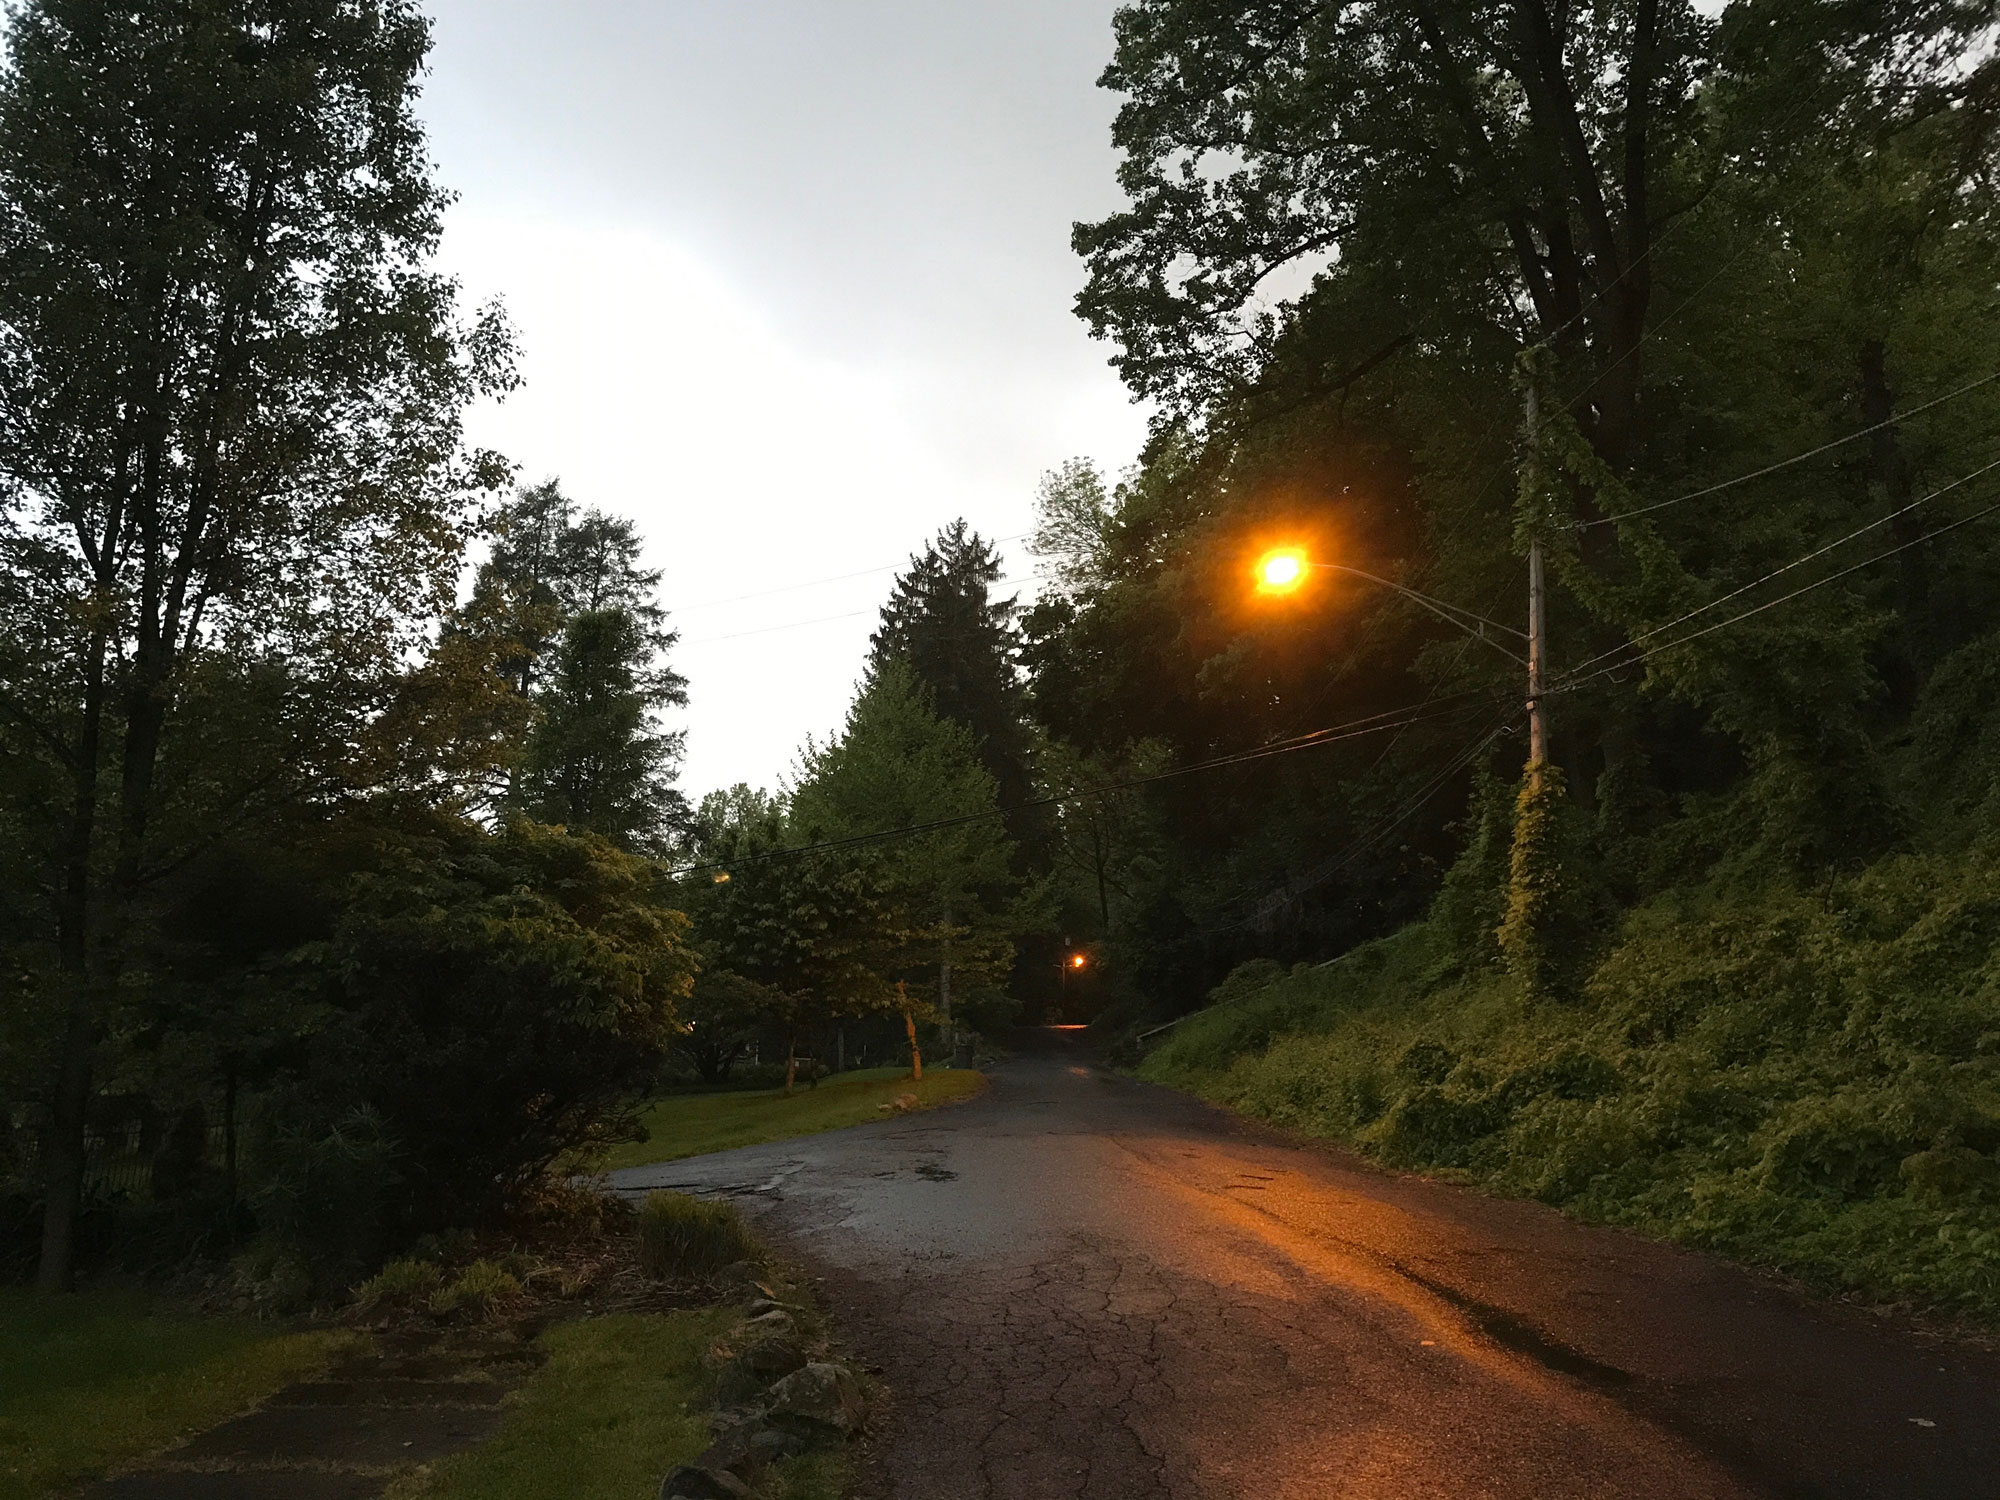 Rain clouds overhead, dark trees barely illuminated in the morning light. A street lamp glows to the right.